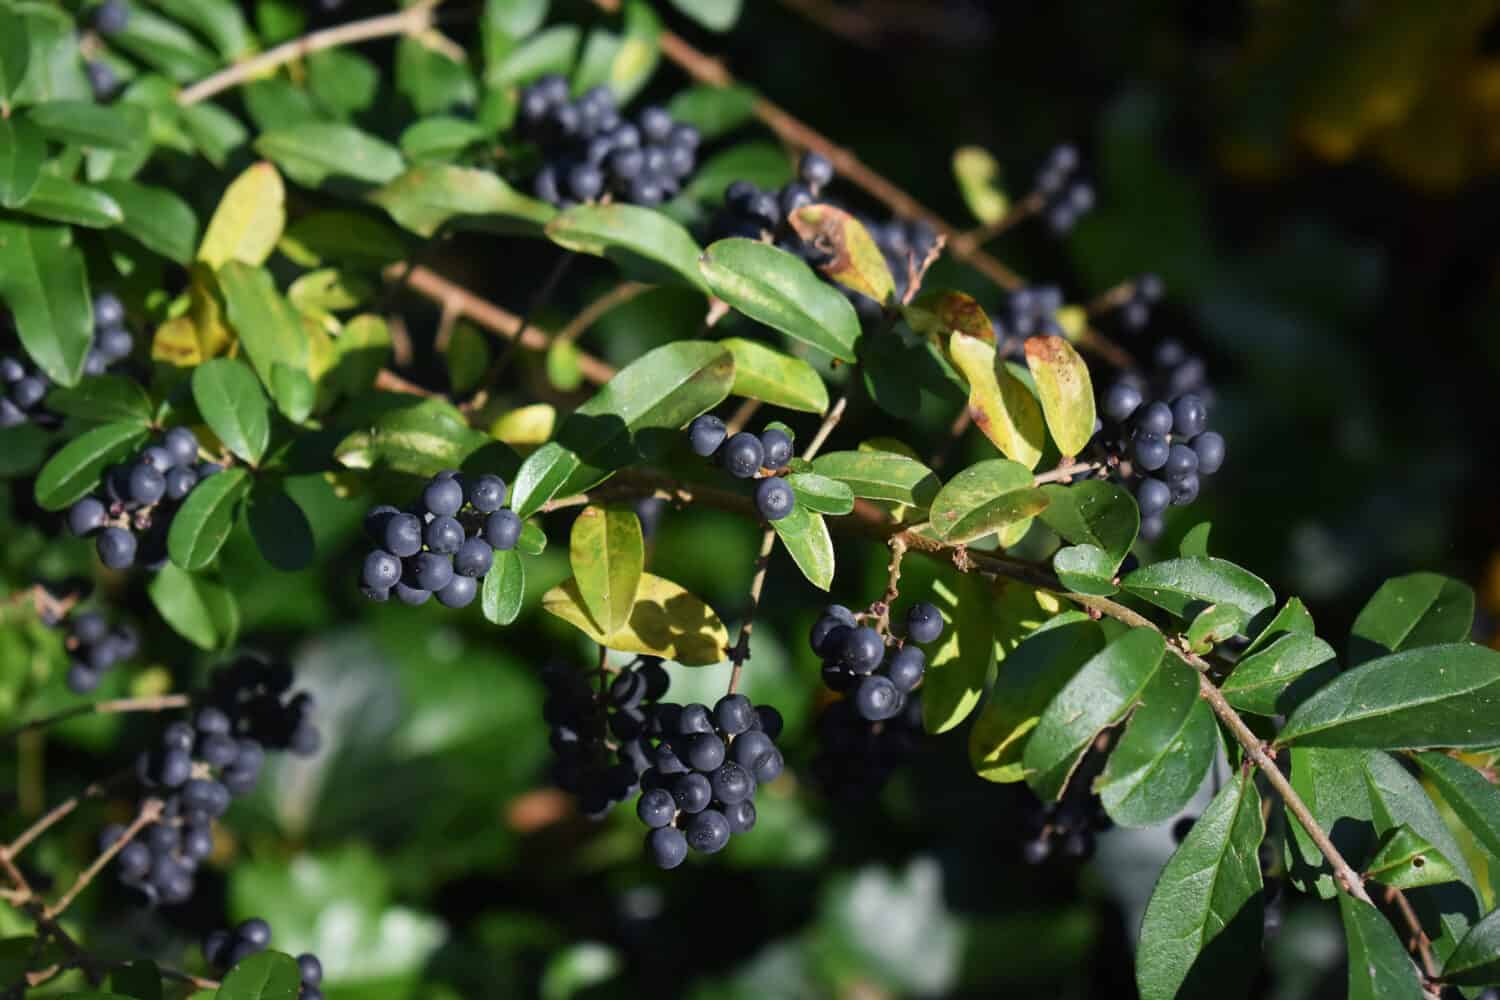 Branches with berries of Ligustrum sinense or Chinese privet, in the garden.